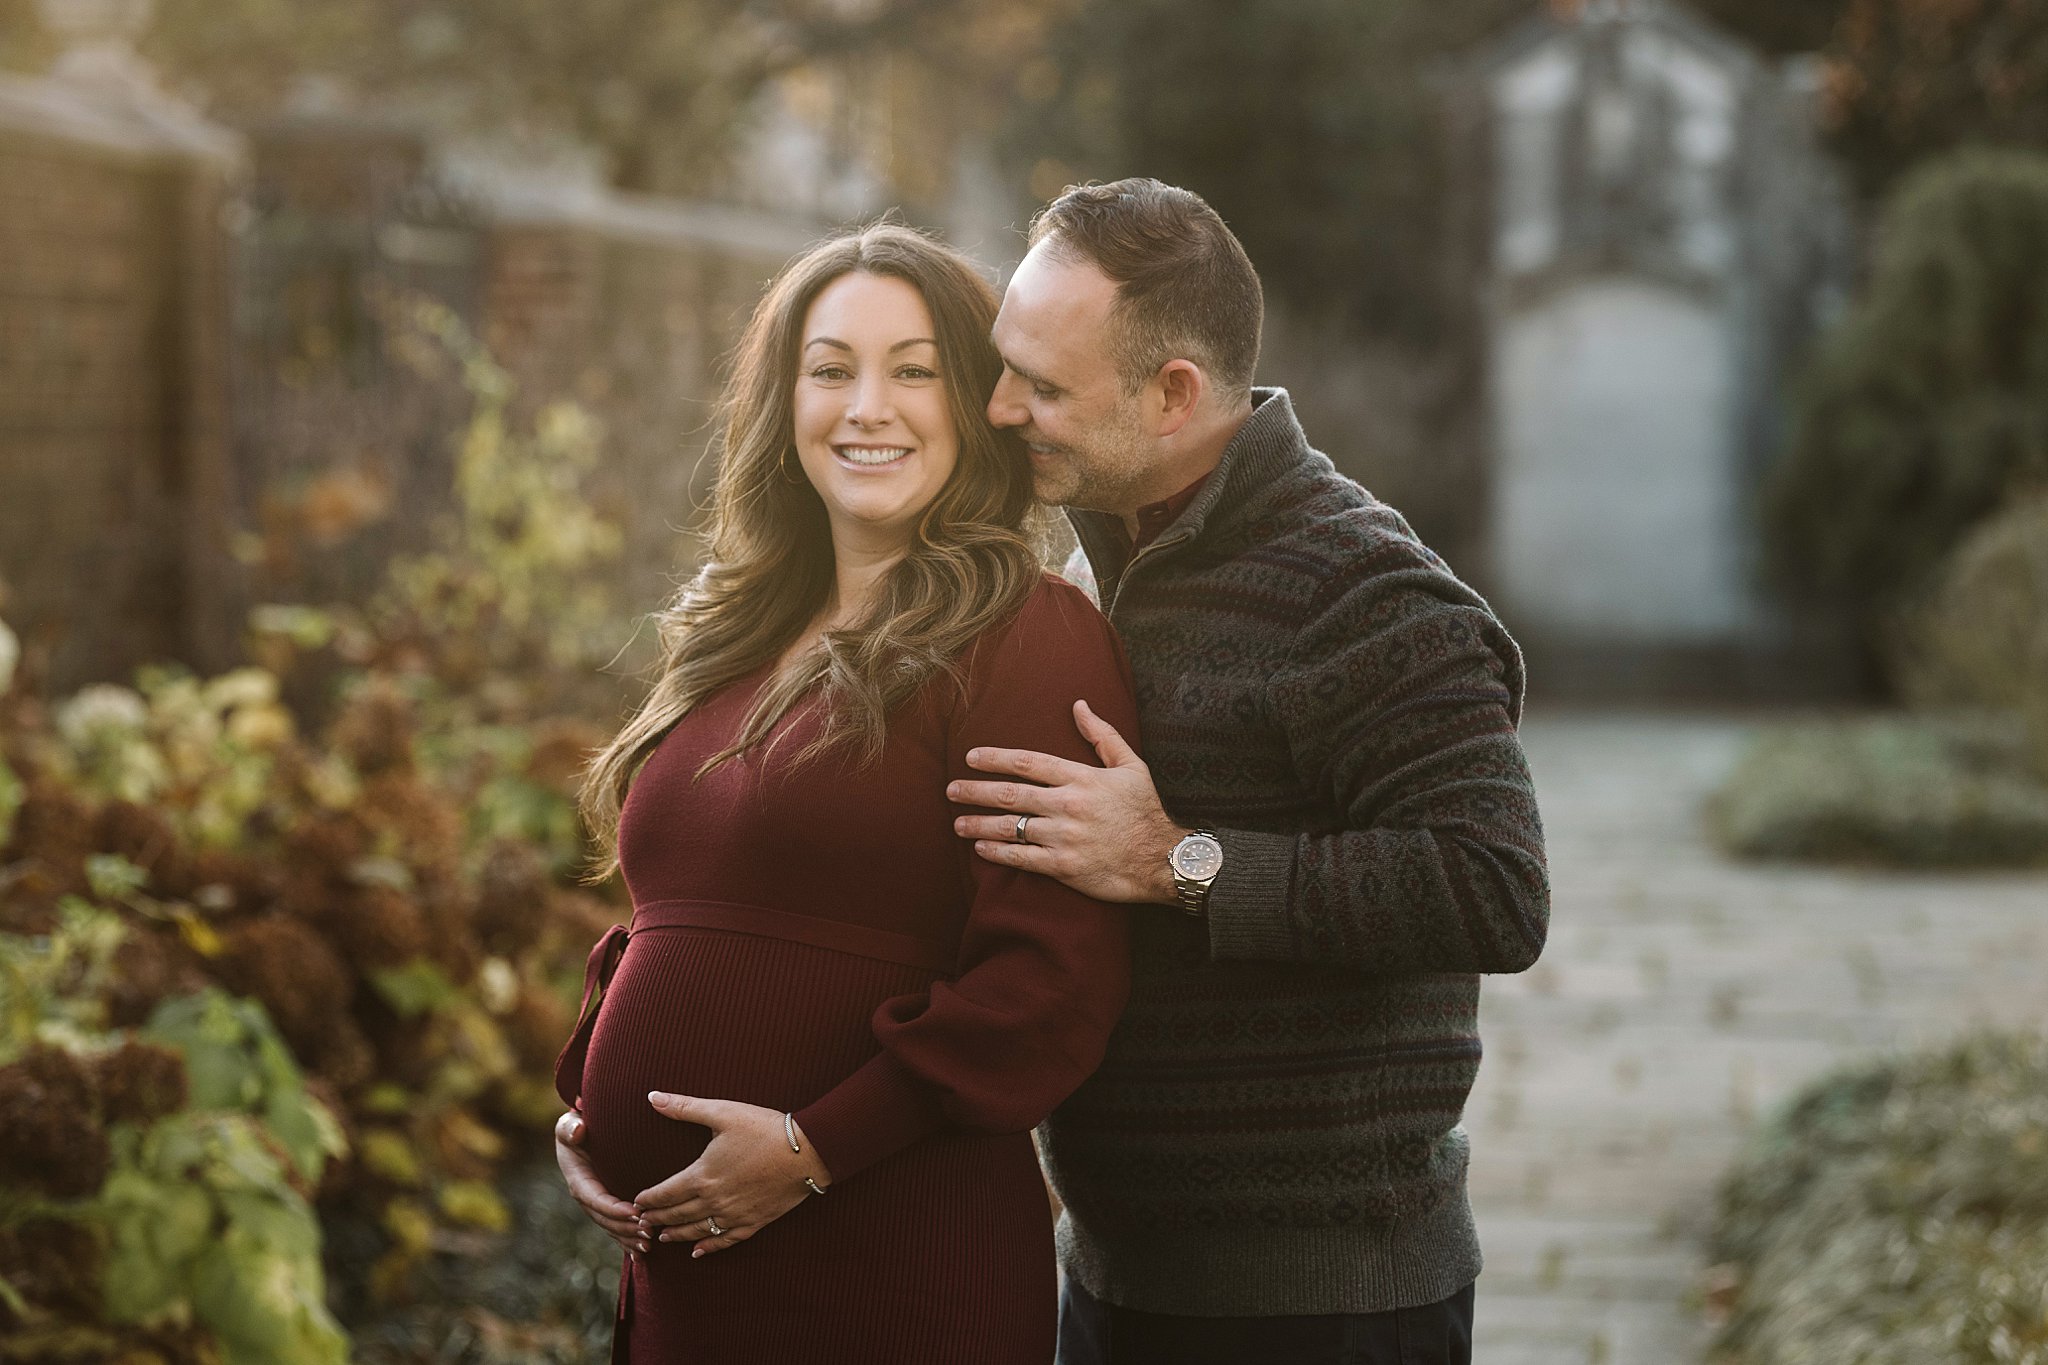 You are currently viewing Maternity Portraits: Capturing the Glow at Mellon Park